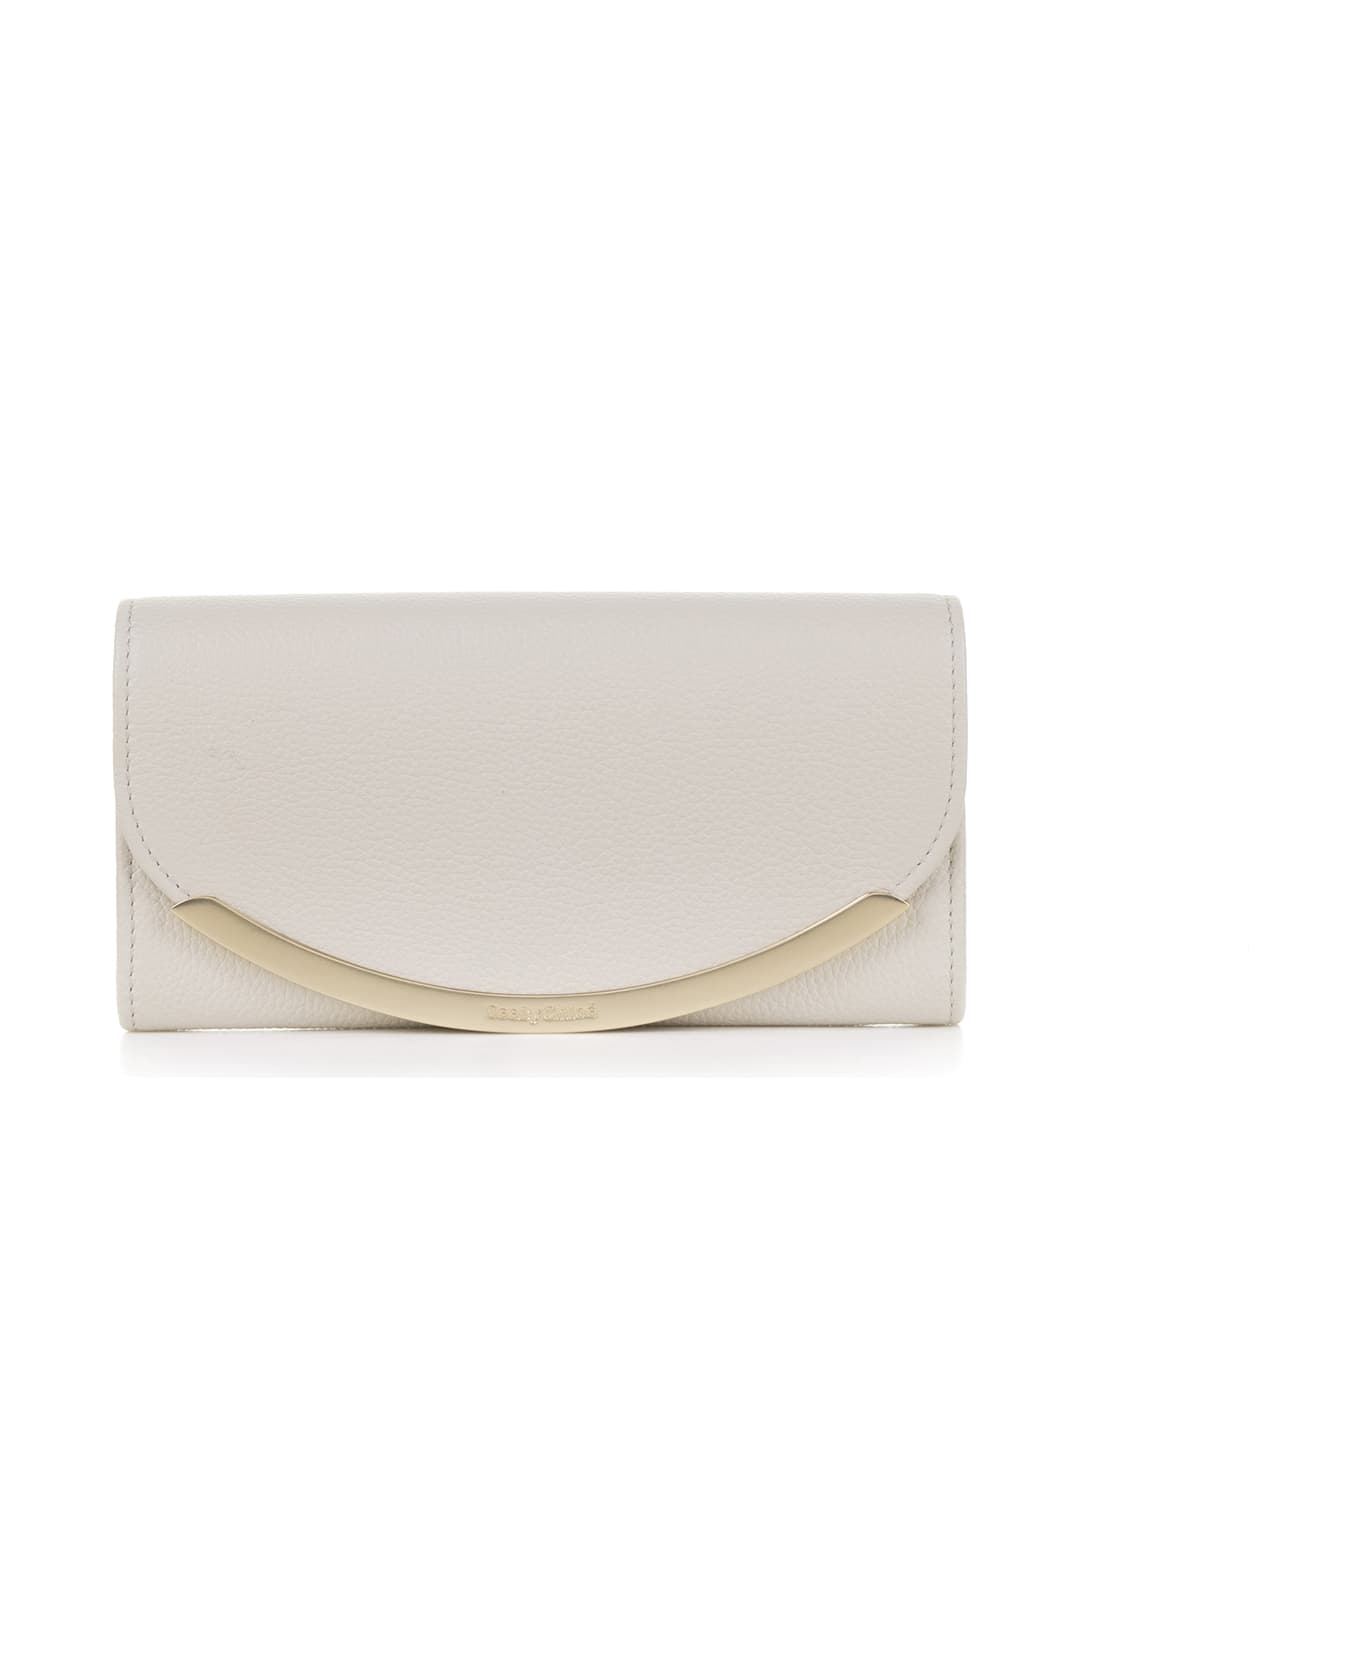 See by Chloé Wallet - CEMENT BEIGE 財布